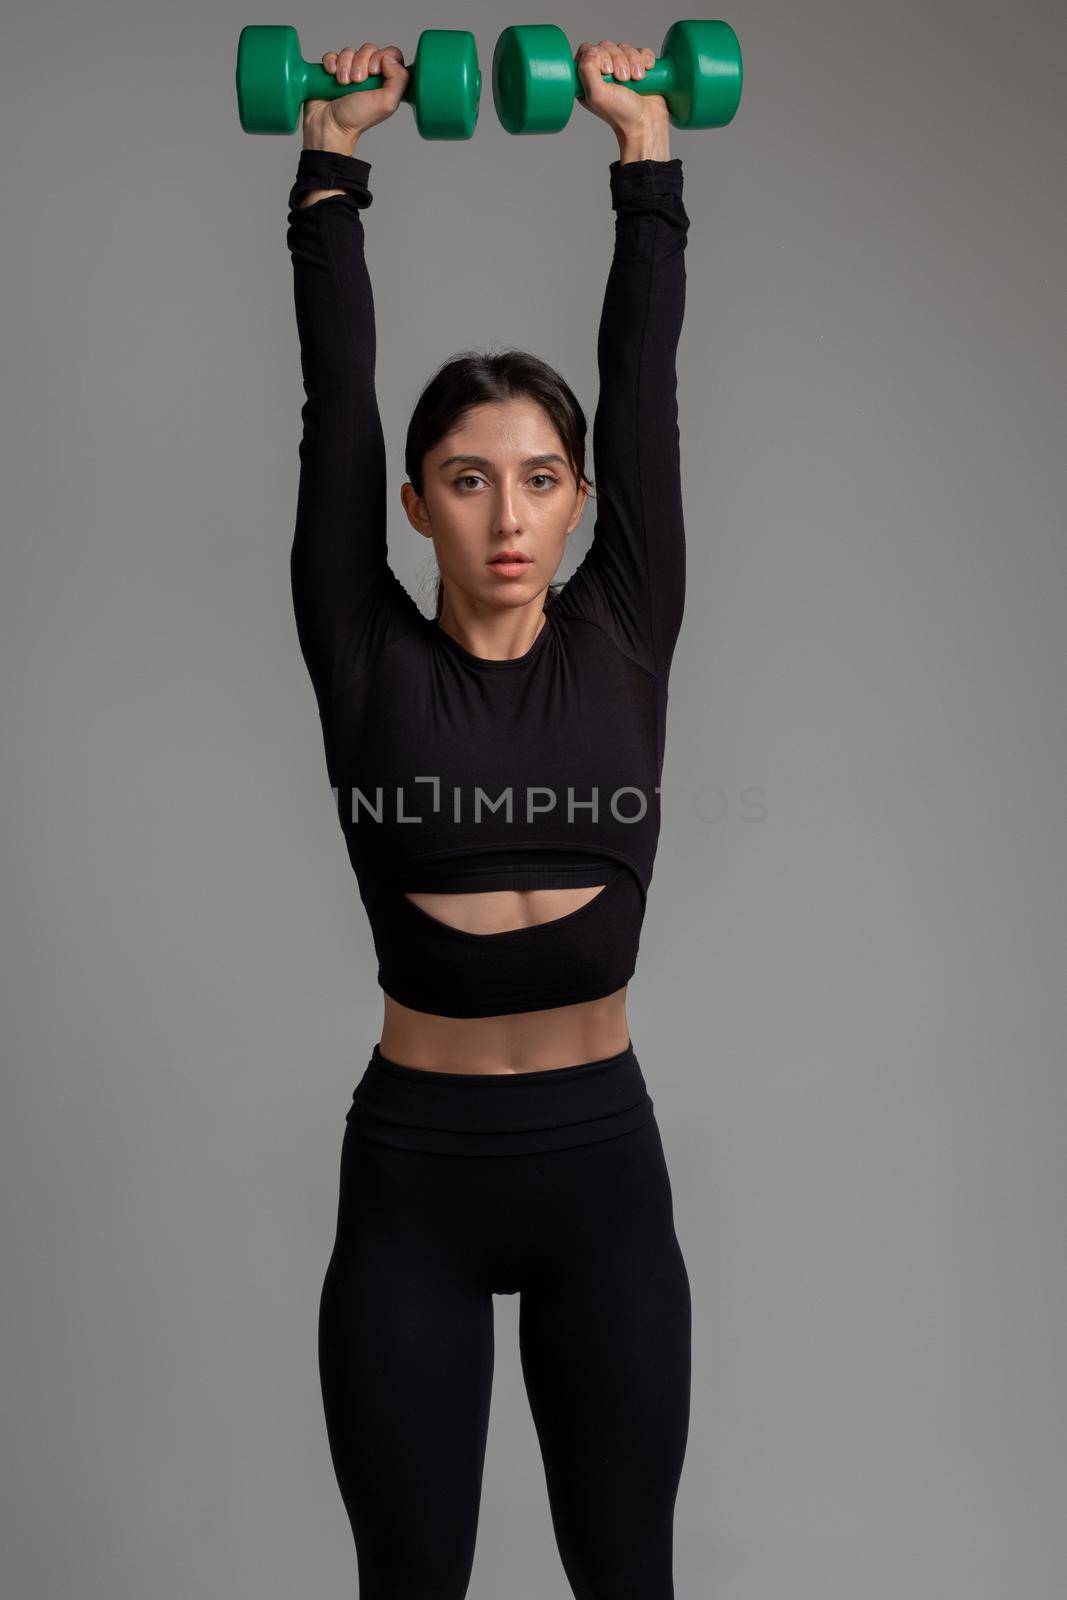 Concentrated fit brunette in black sportswear performing upper body workout with dumbbells on grey background. Set of exercises for shoulders. Fitness and bodybuilding concept